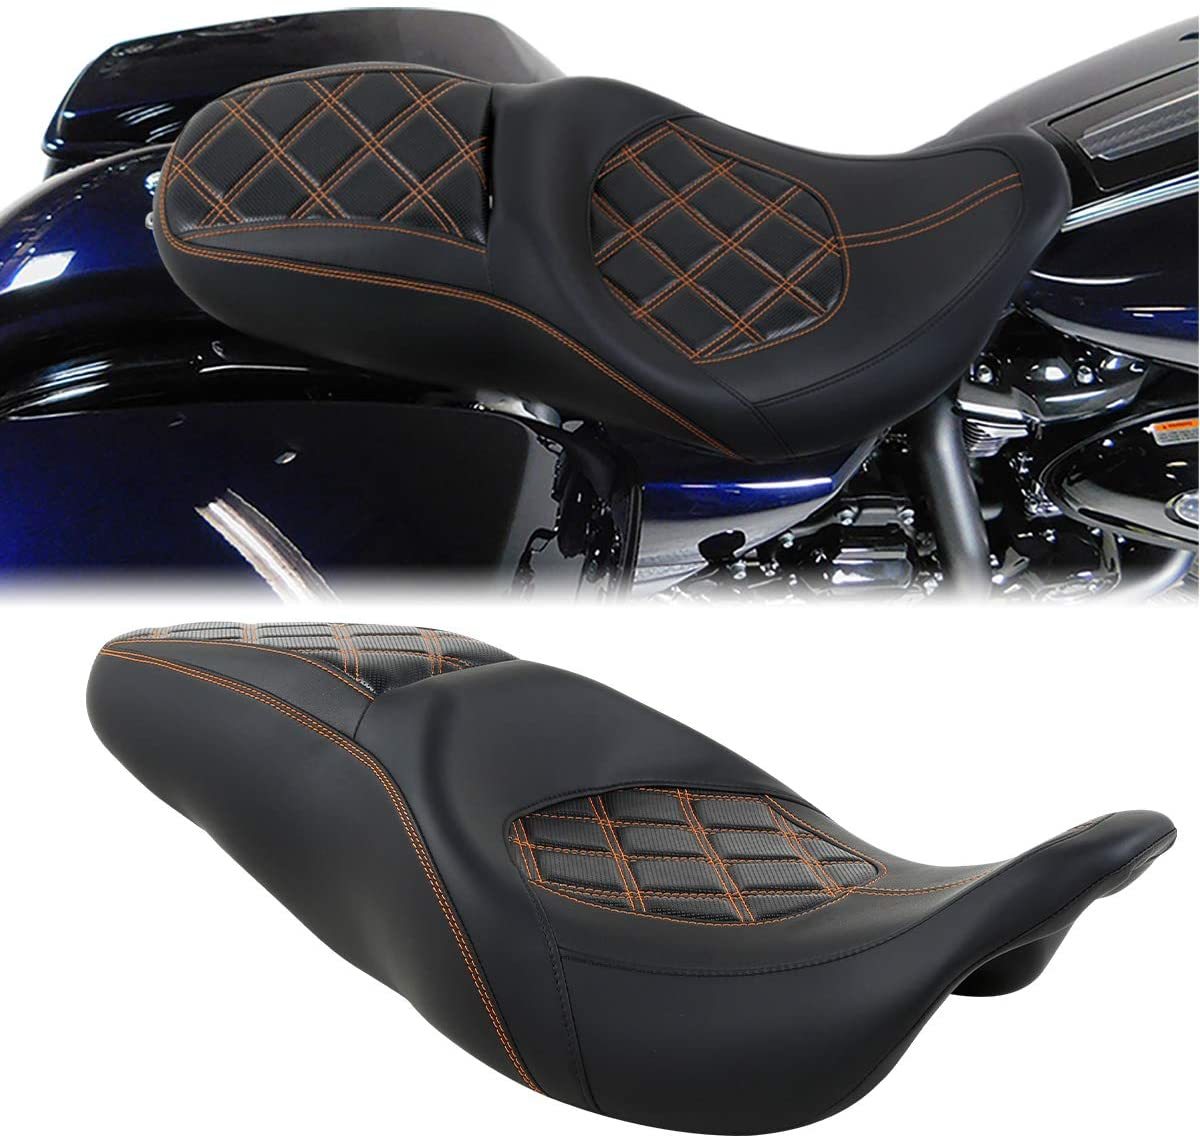 TCMT-Driver-Rider-Passenger-Seat-For-Harley-Touring-Road-King